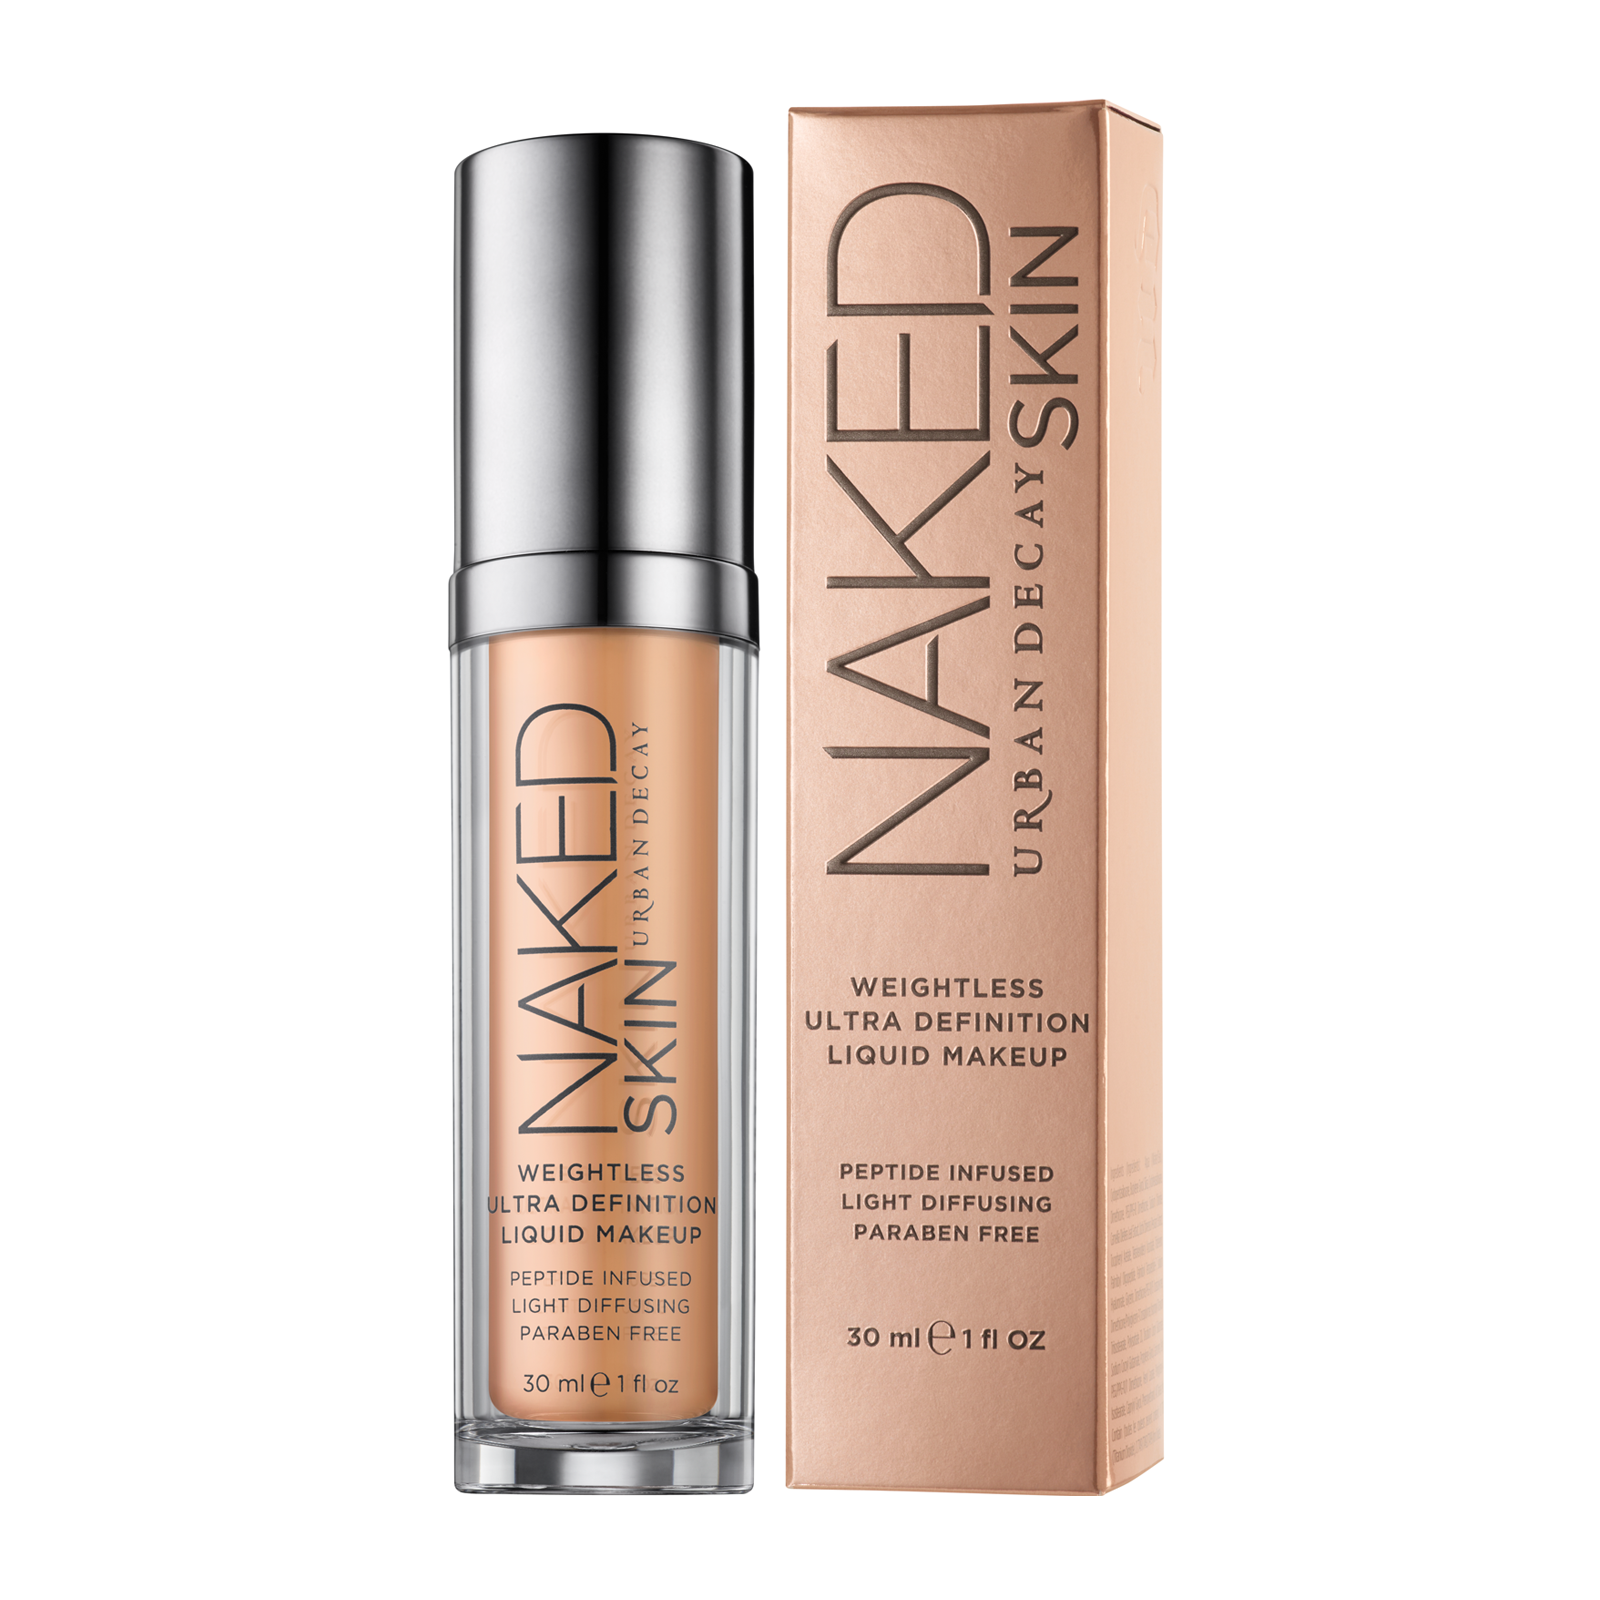 Urban Decays Naked Skin Foundation Provides Weightless 